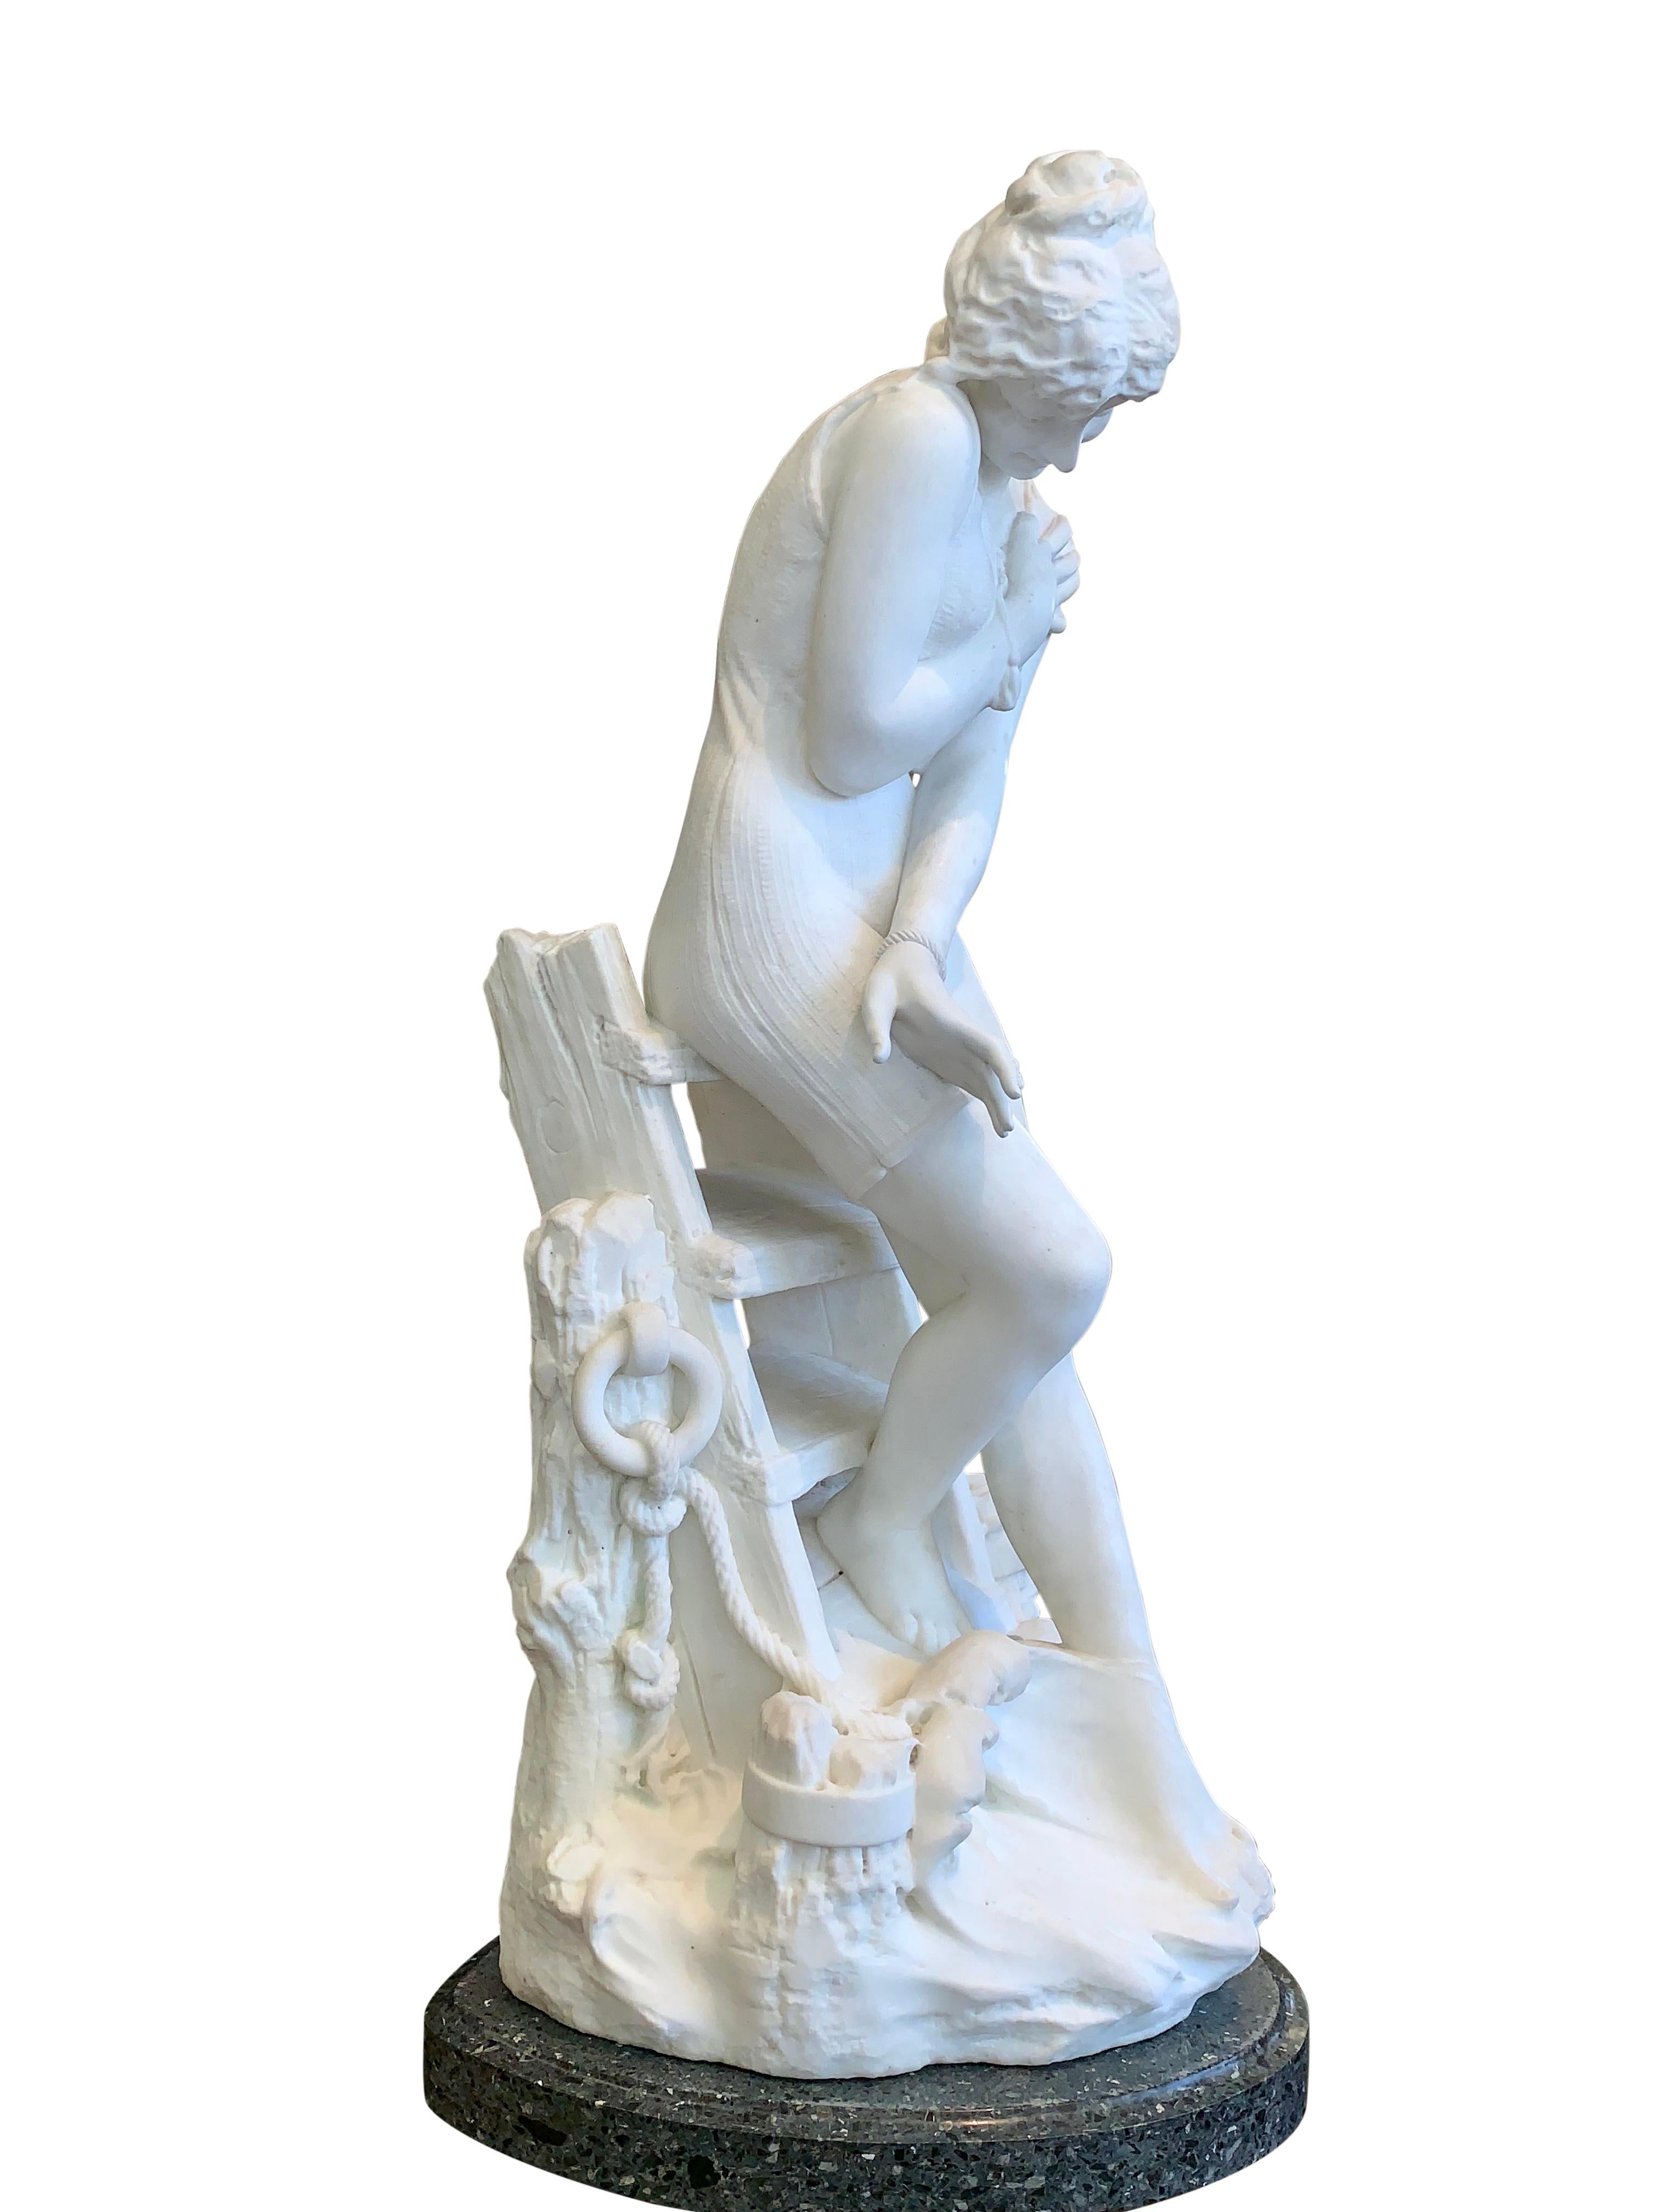 Carved Marble Figure by Emilio Fiaschi, 'Testing The Waters' For Sale